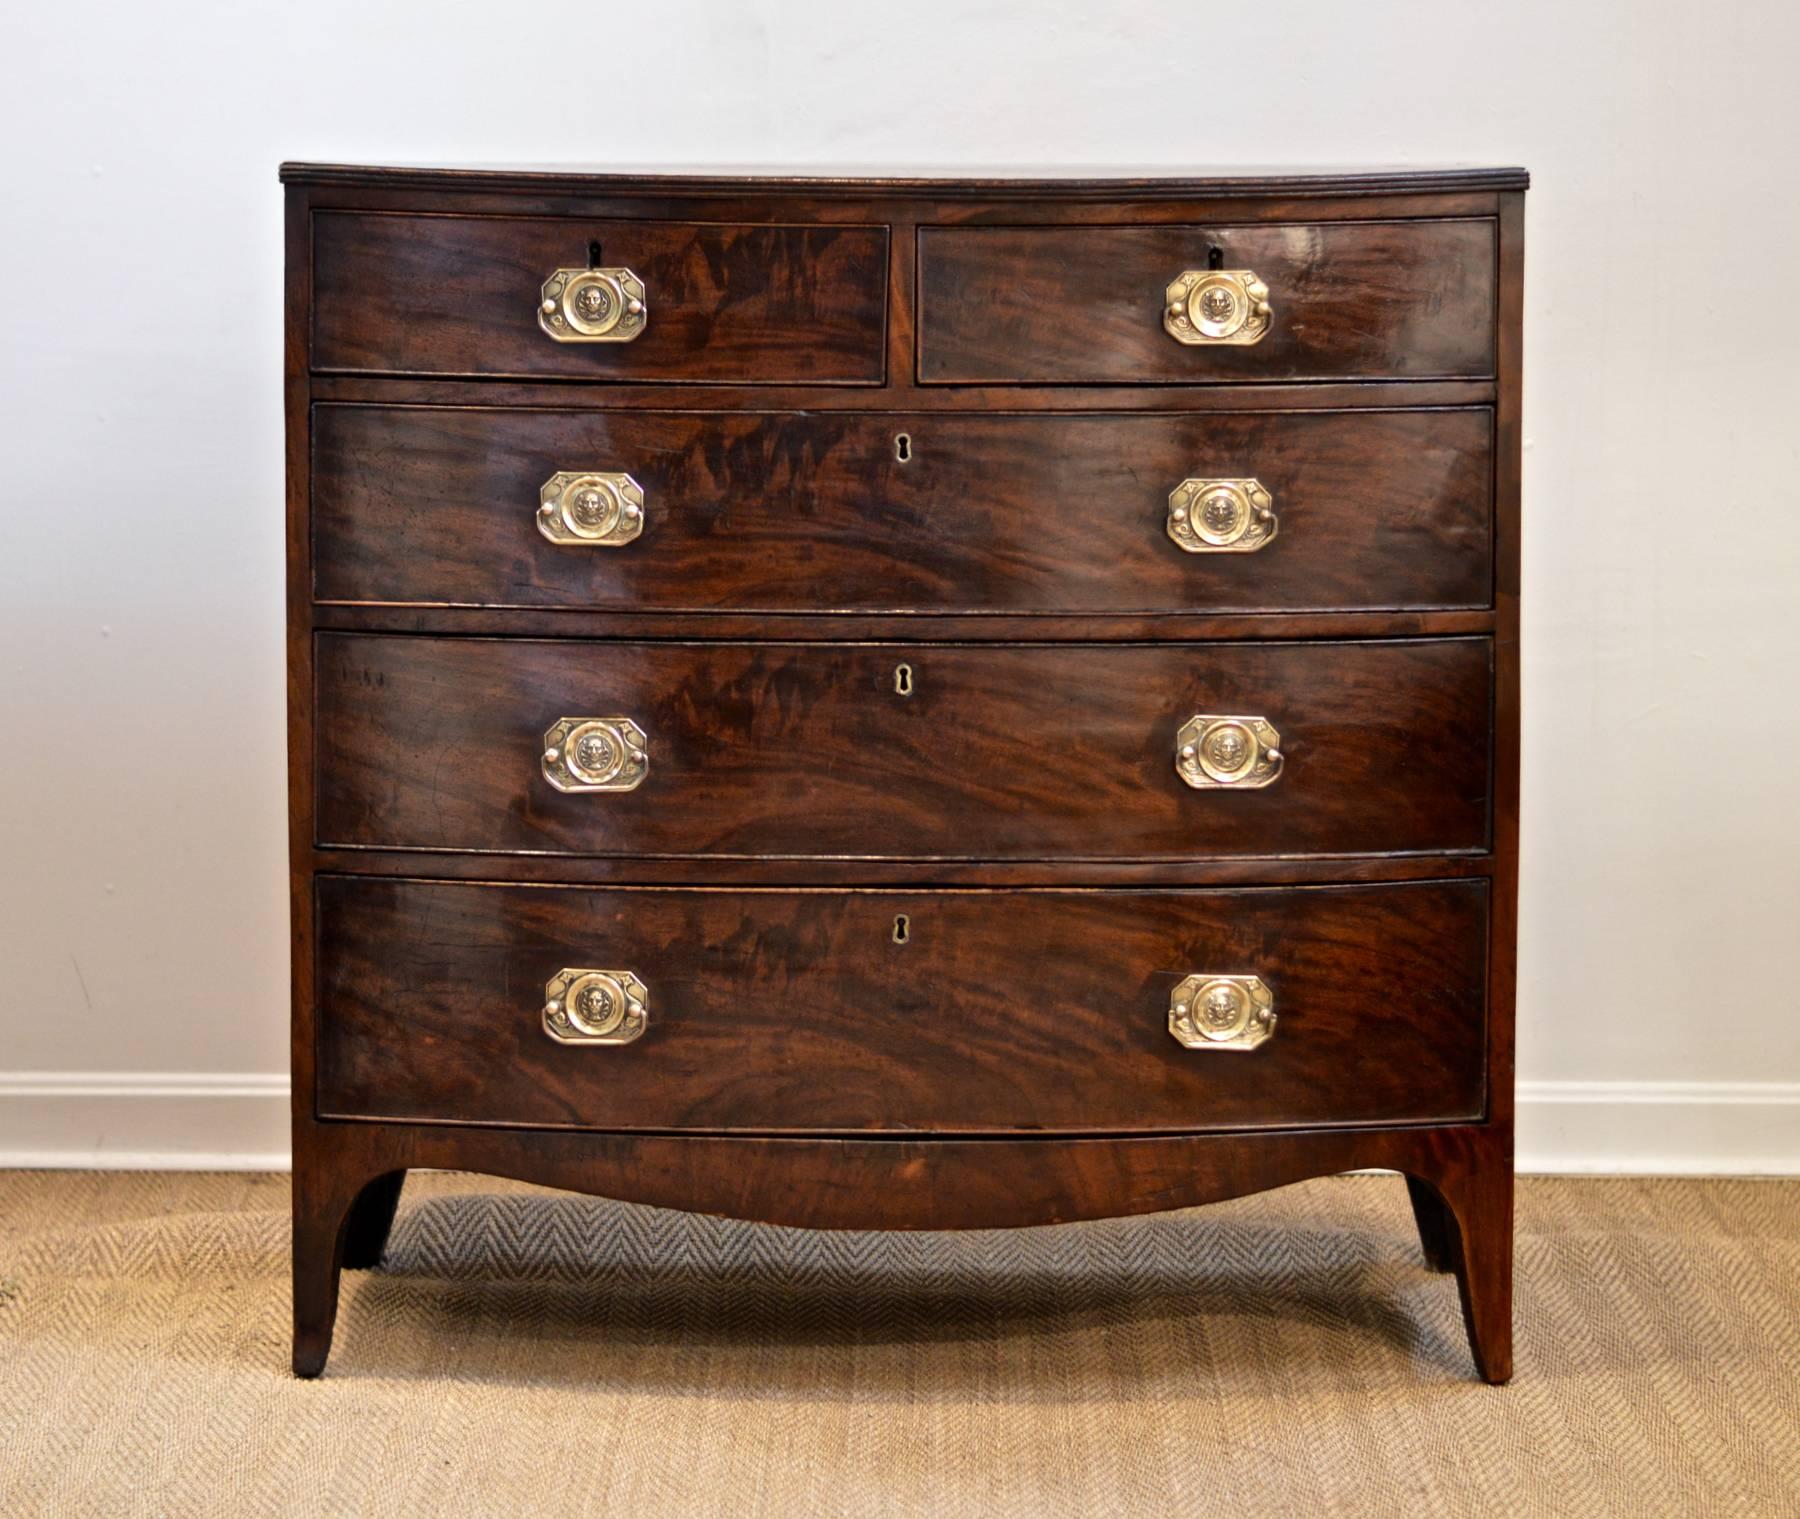 Period George VI bowfront chest of mahogany having rare brasses depicting the face of neptune. Perfect parts handsome and pretty, the two short drawers reside over three graduated long drawers that all function very well. This mid 19th Century